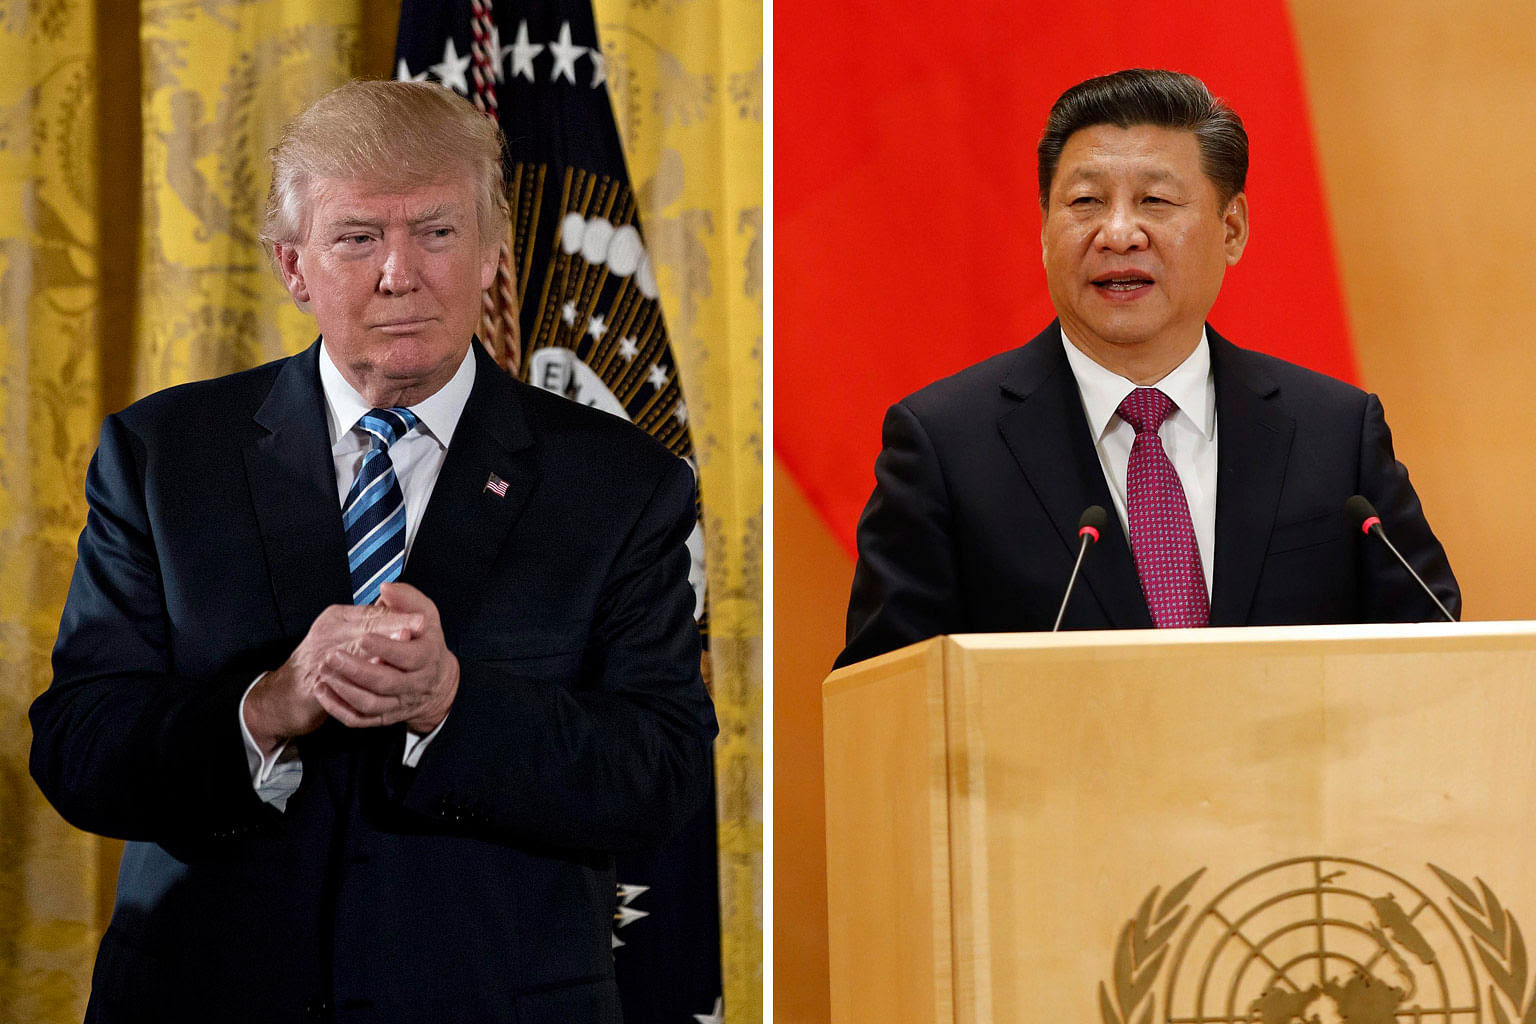 Mr Donald Trump's America First is not a surprise but the contrast between his stand and Mr Xi Jinping's economic globalisation, which the latter repeated 24 times in his Davos speech, is stark and bittersweet to Western elites. Still, questions rema